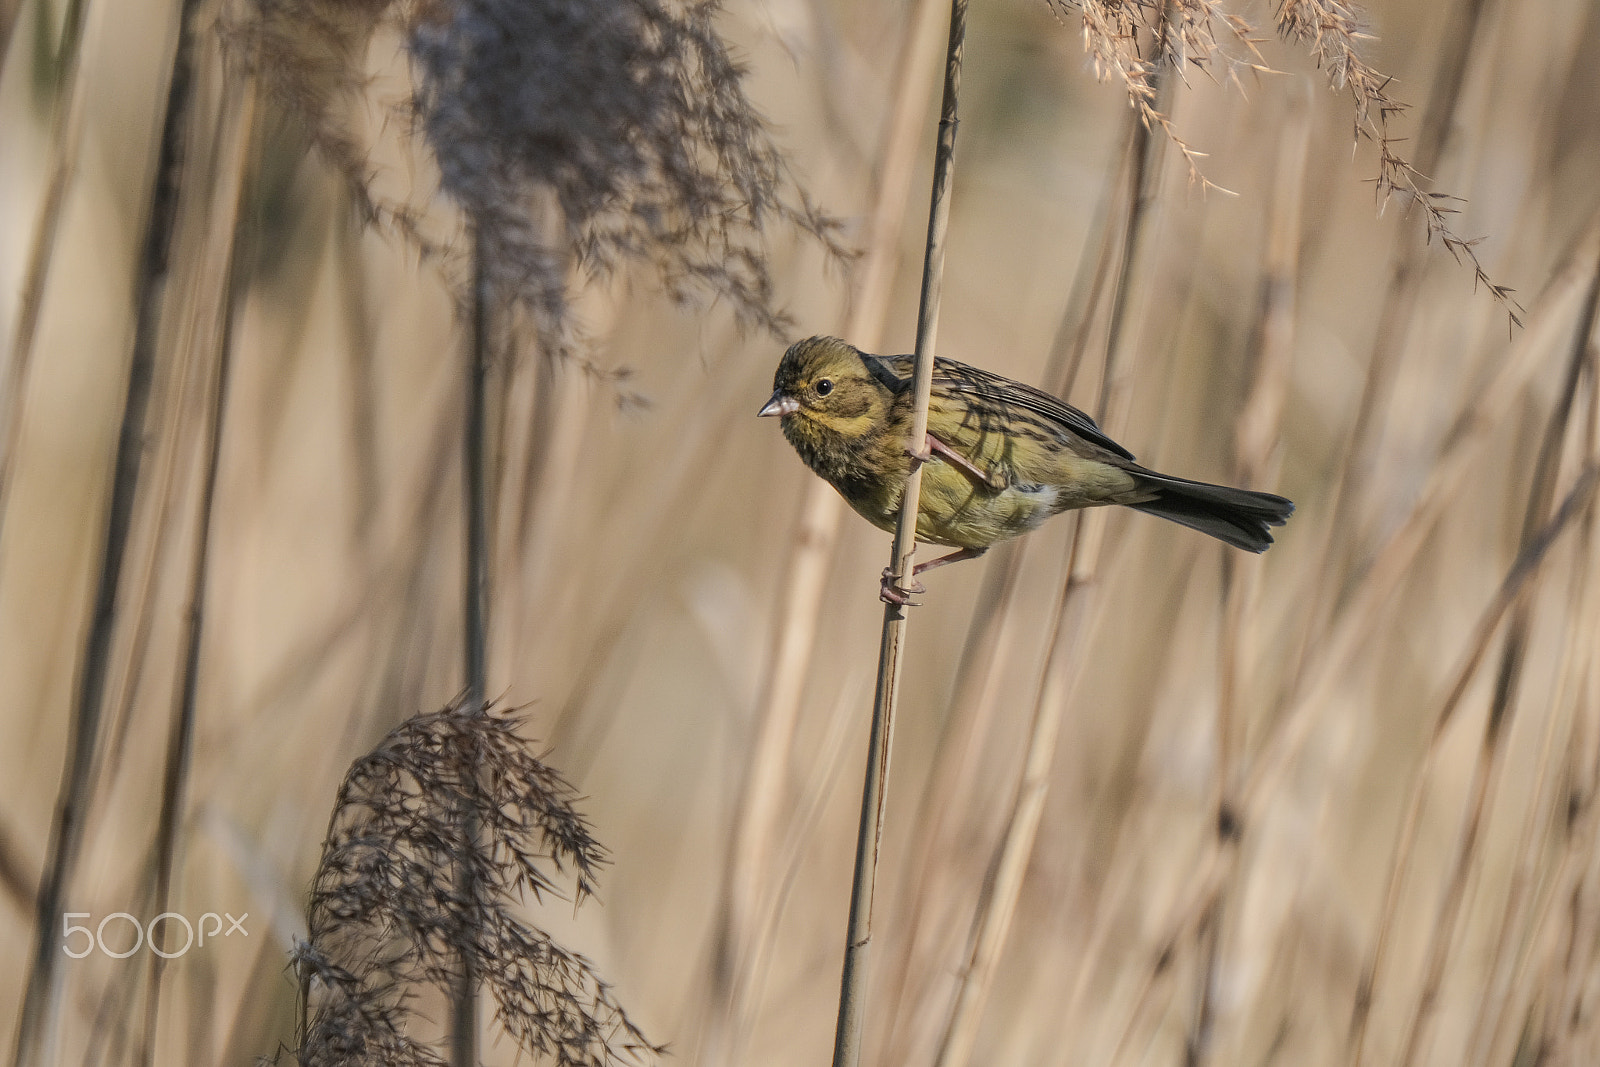 XF100-400mmF4.5-5.6 R LM OIS WR + 1.4x sample photo. Black-faced bunting photography